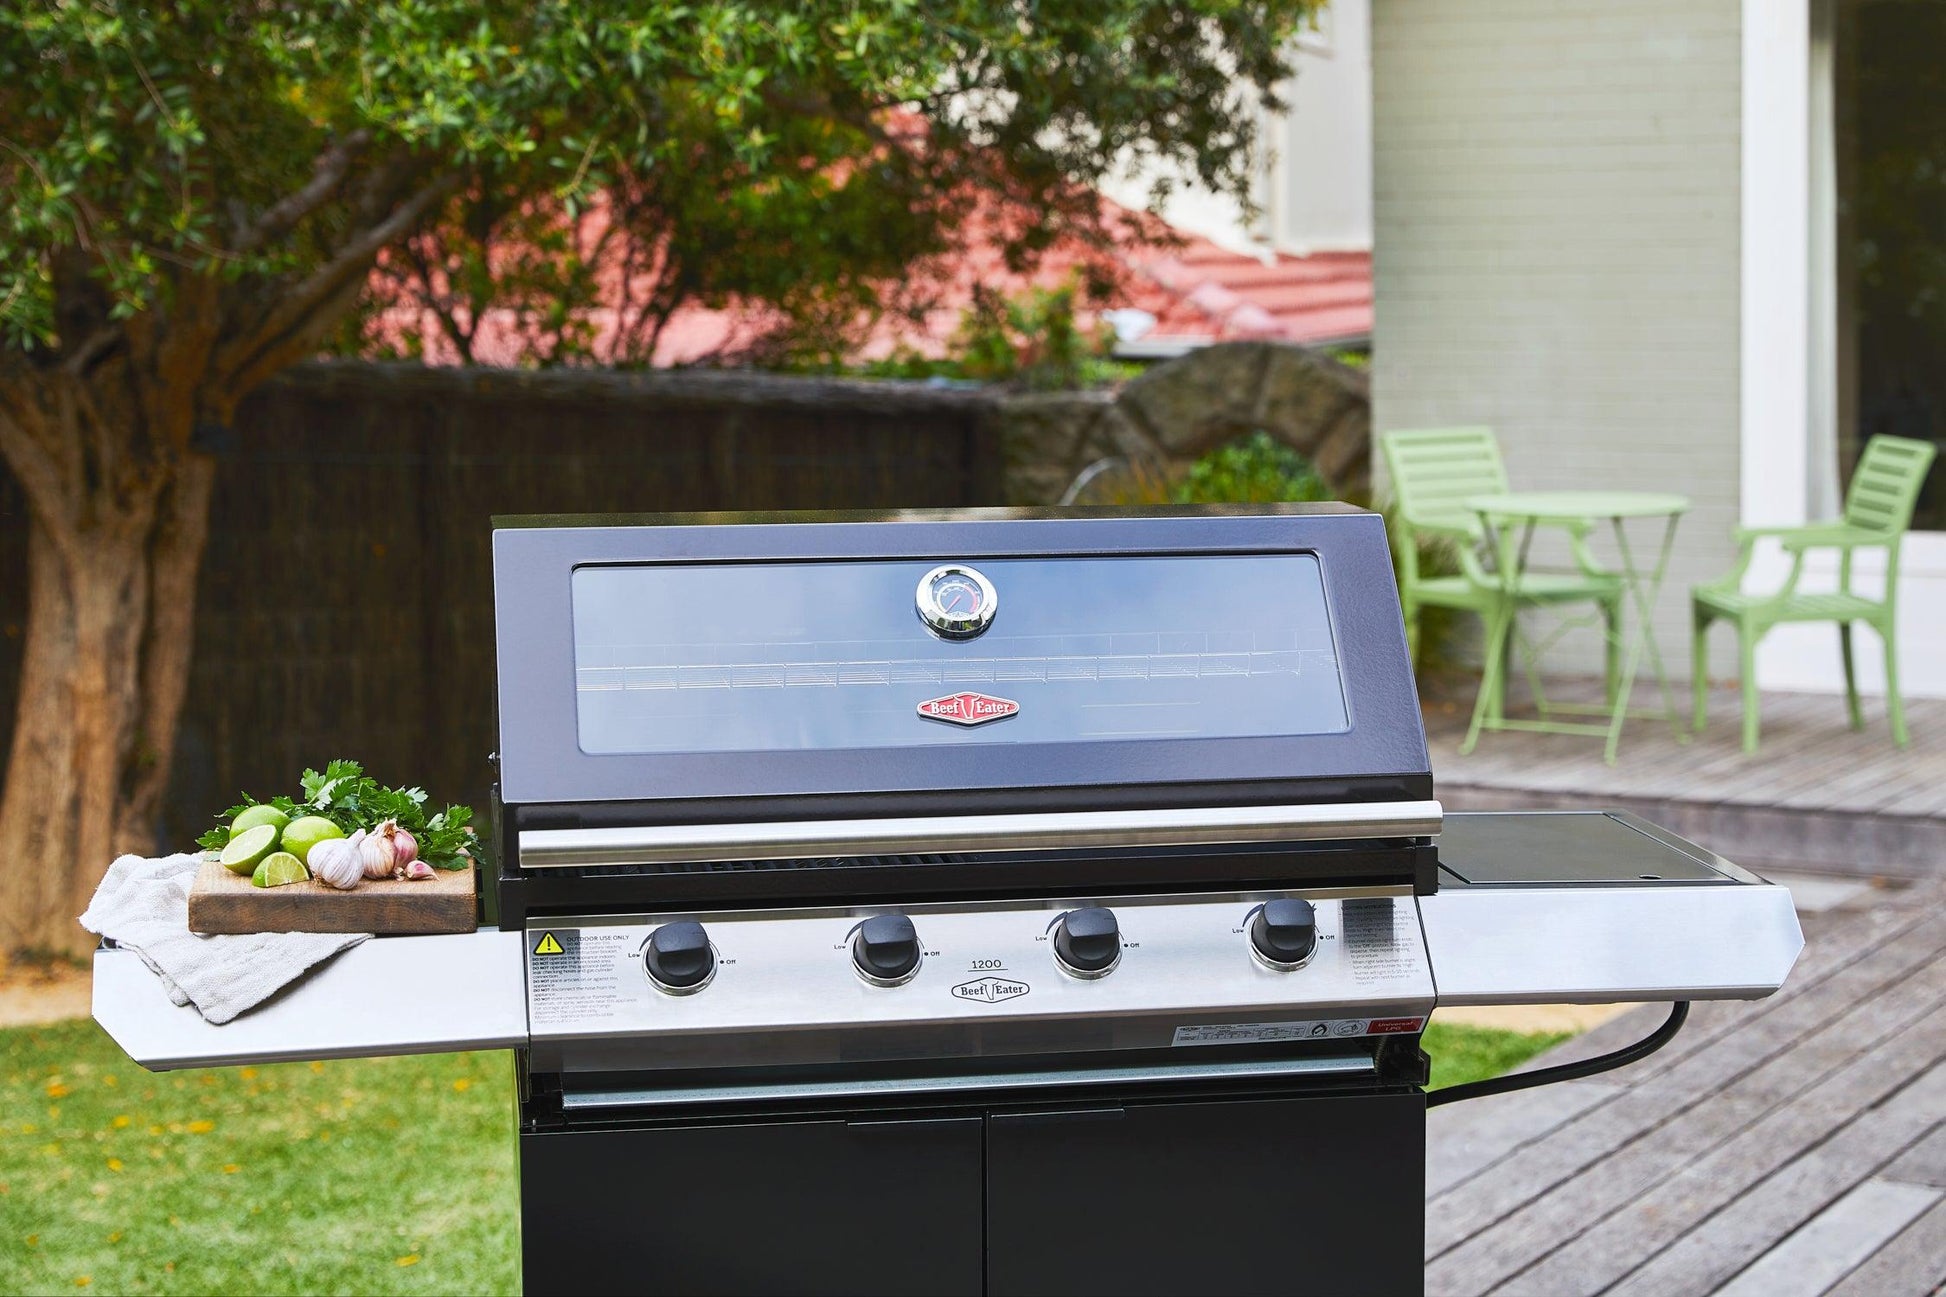 A black Brisks BeefEater 1200E Series 4 Burner BBQ & Trolley with four control knobs and a closed lid is situated on a wooden deck. A tray with vegetables and herbs adorns the left side shelf. In the background, an outdoor kitchen scene features a tree, a house, and a small seating area with a green table and chairs.